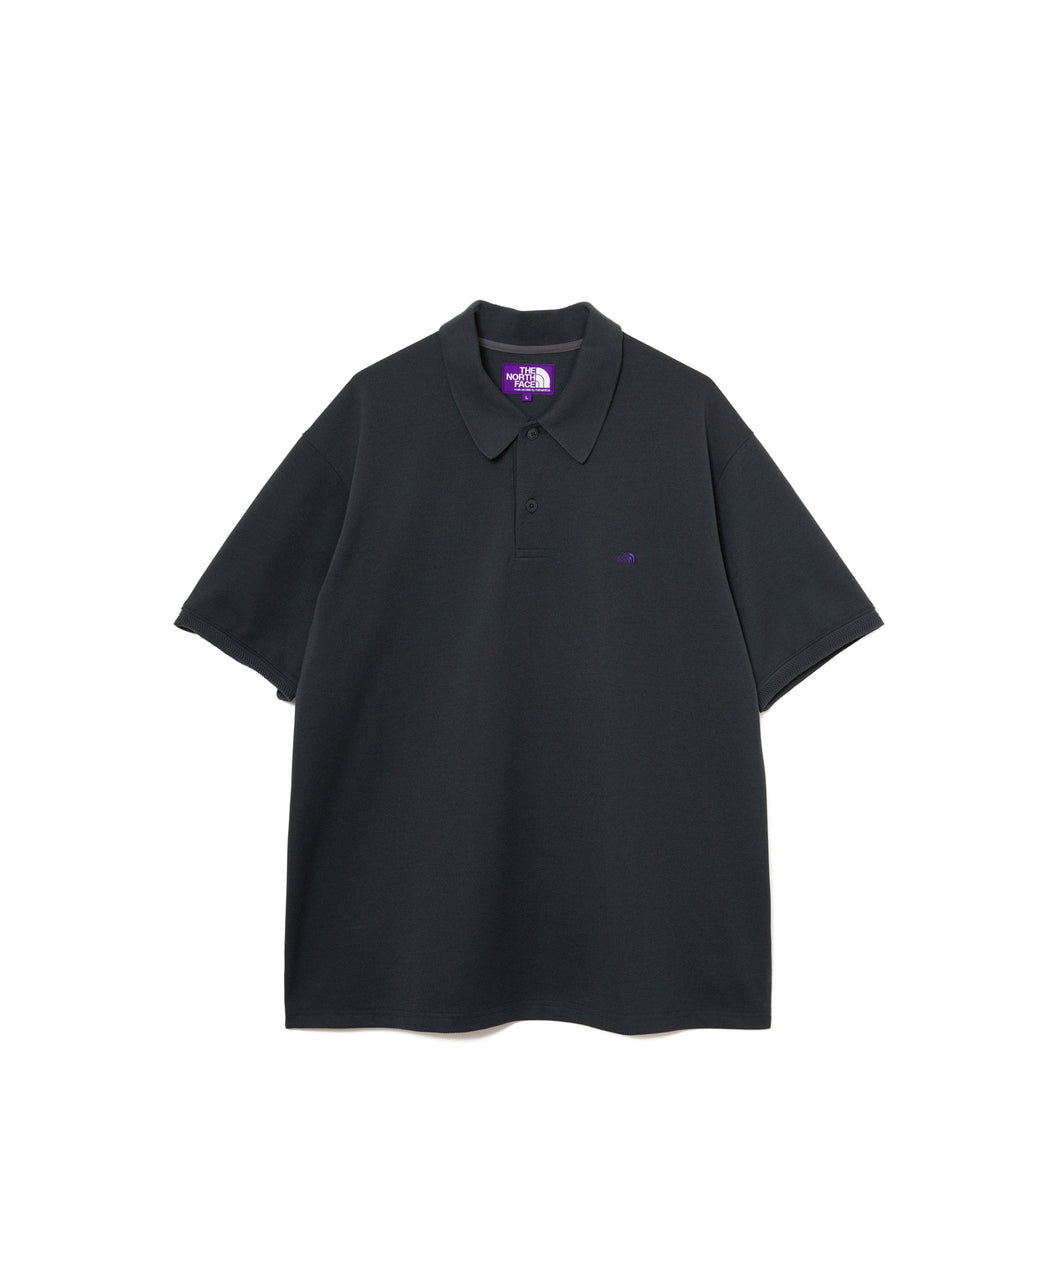 【MEN】THE NORTH FACE PURPLE LABEL Moss Stitch Field Short Sleeve Polo